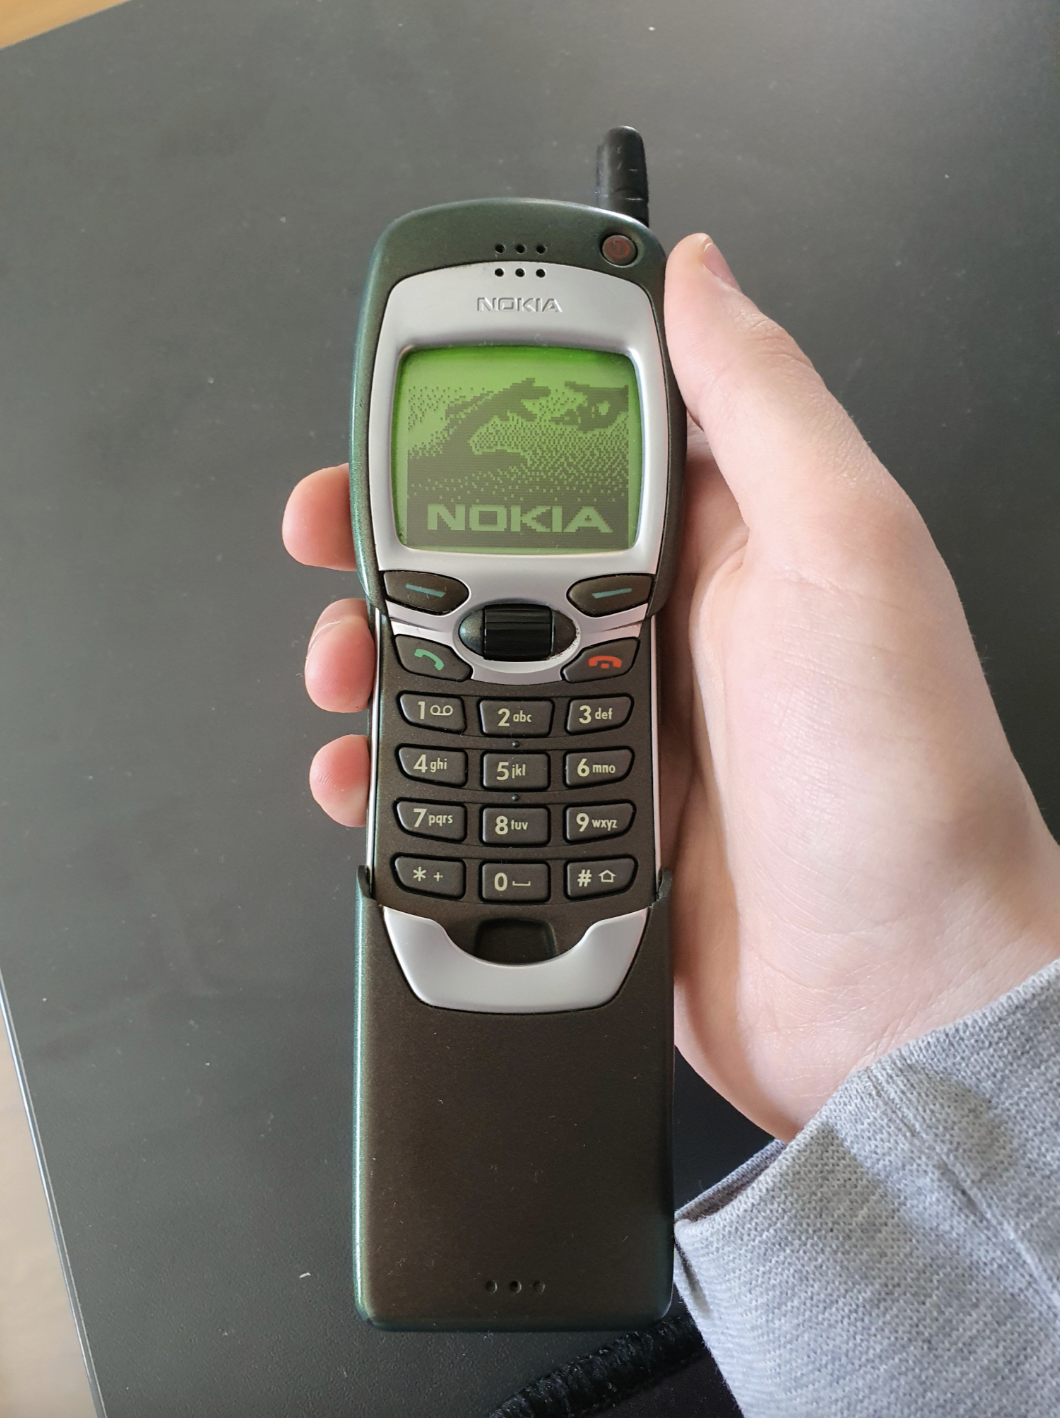 Hand holding a vintage Nokia mobile phone with physical buttons and small screen